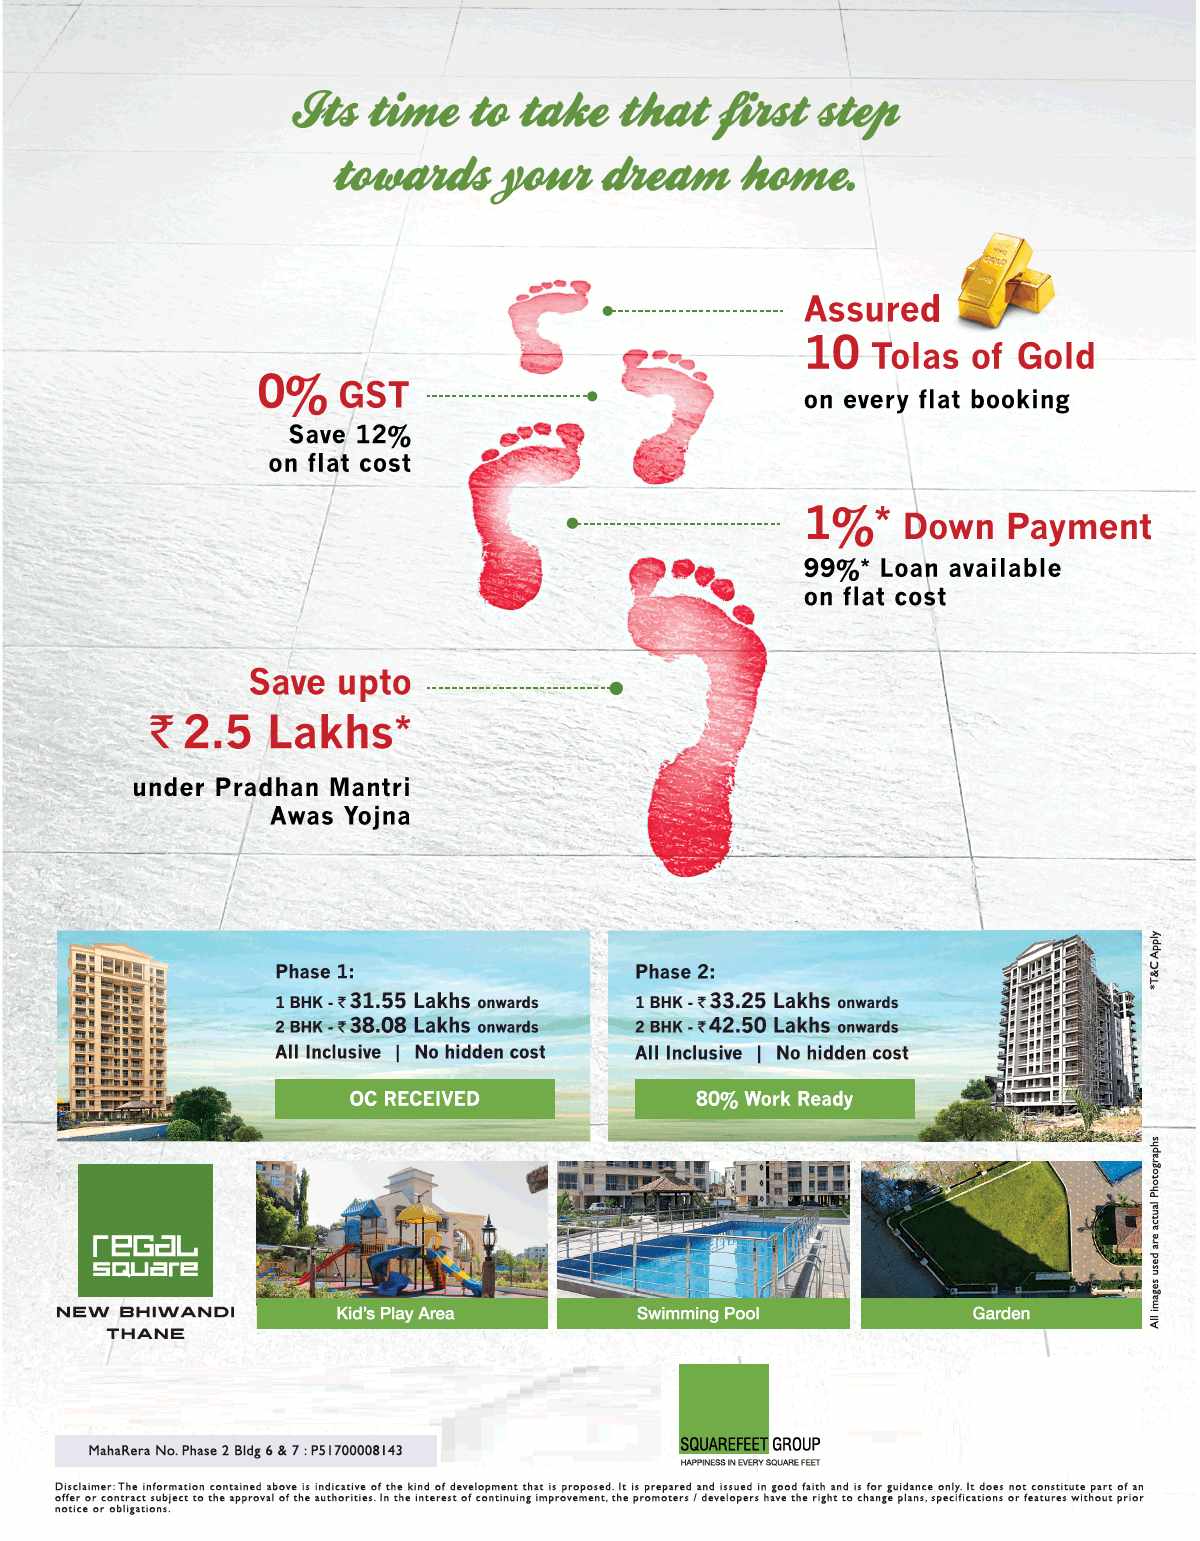 Take your first step towards your dream home at Squarefeet Regal Square in Mumbai Update